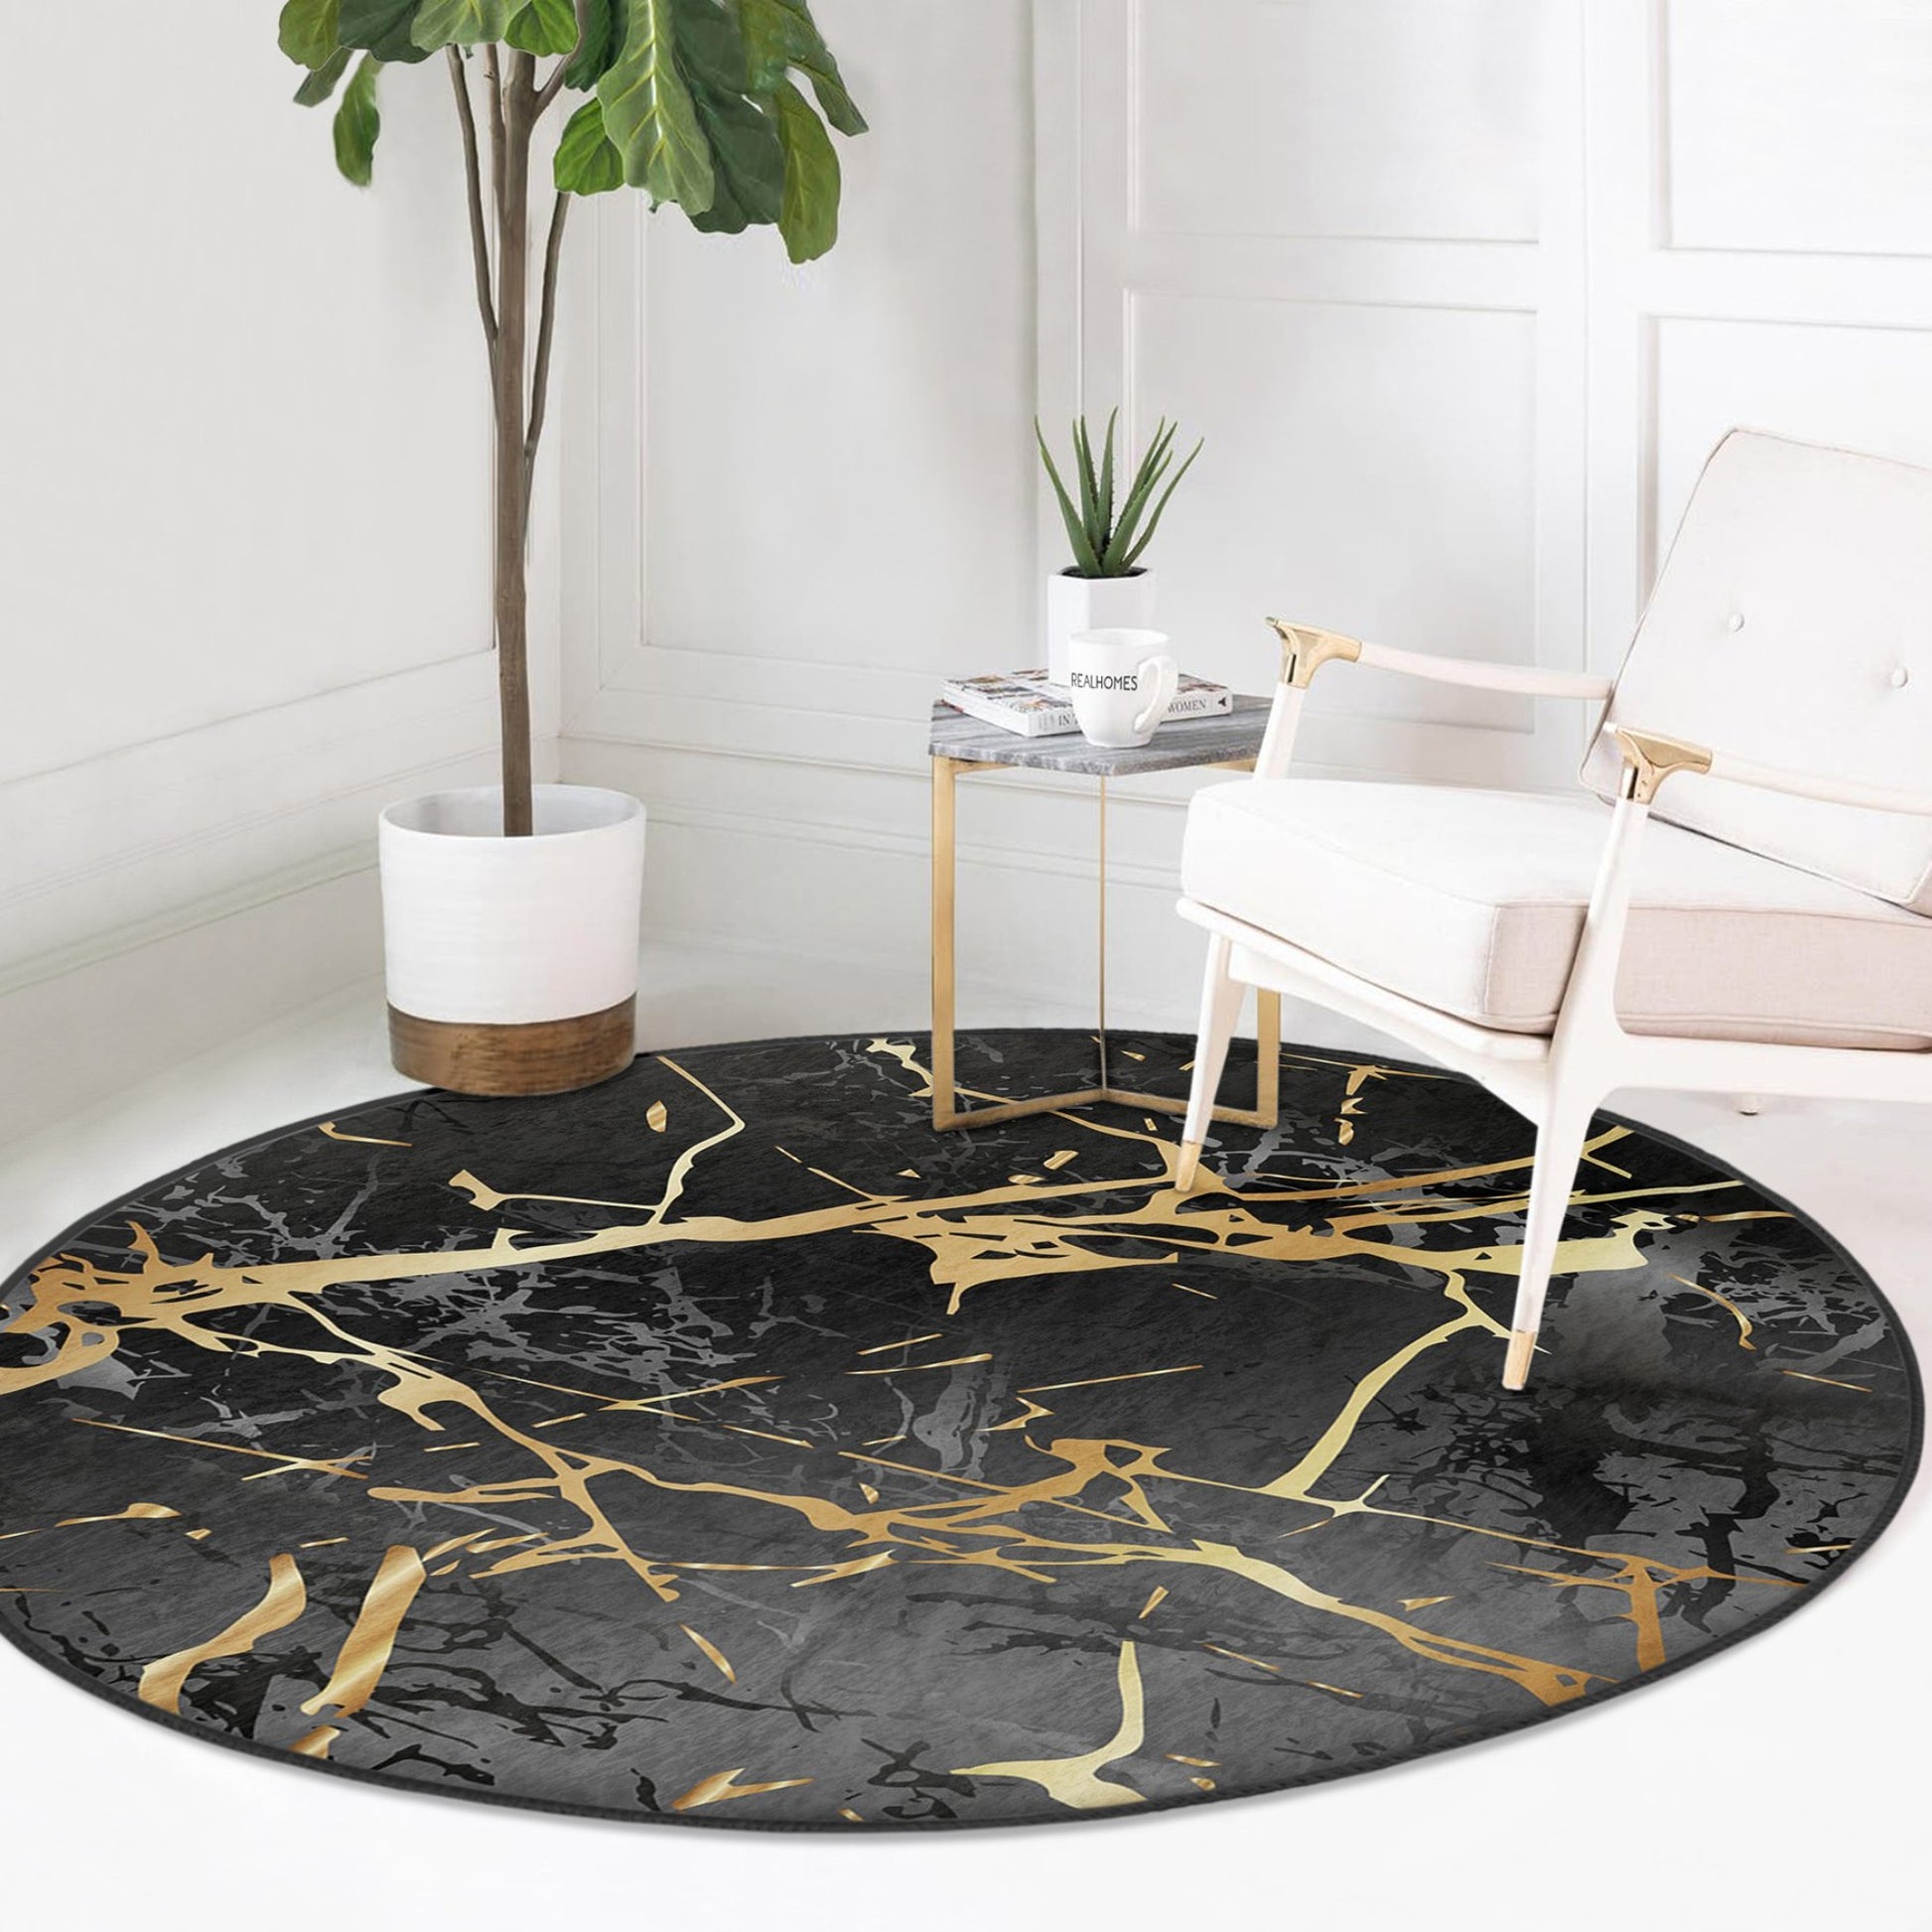 Washable Rug with Black Marble Design - Easy Maintenance